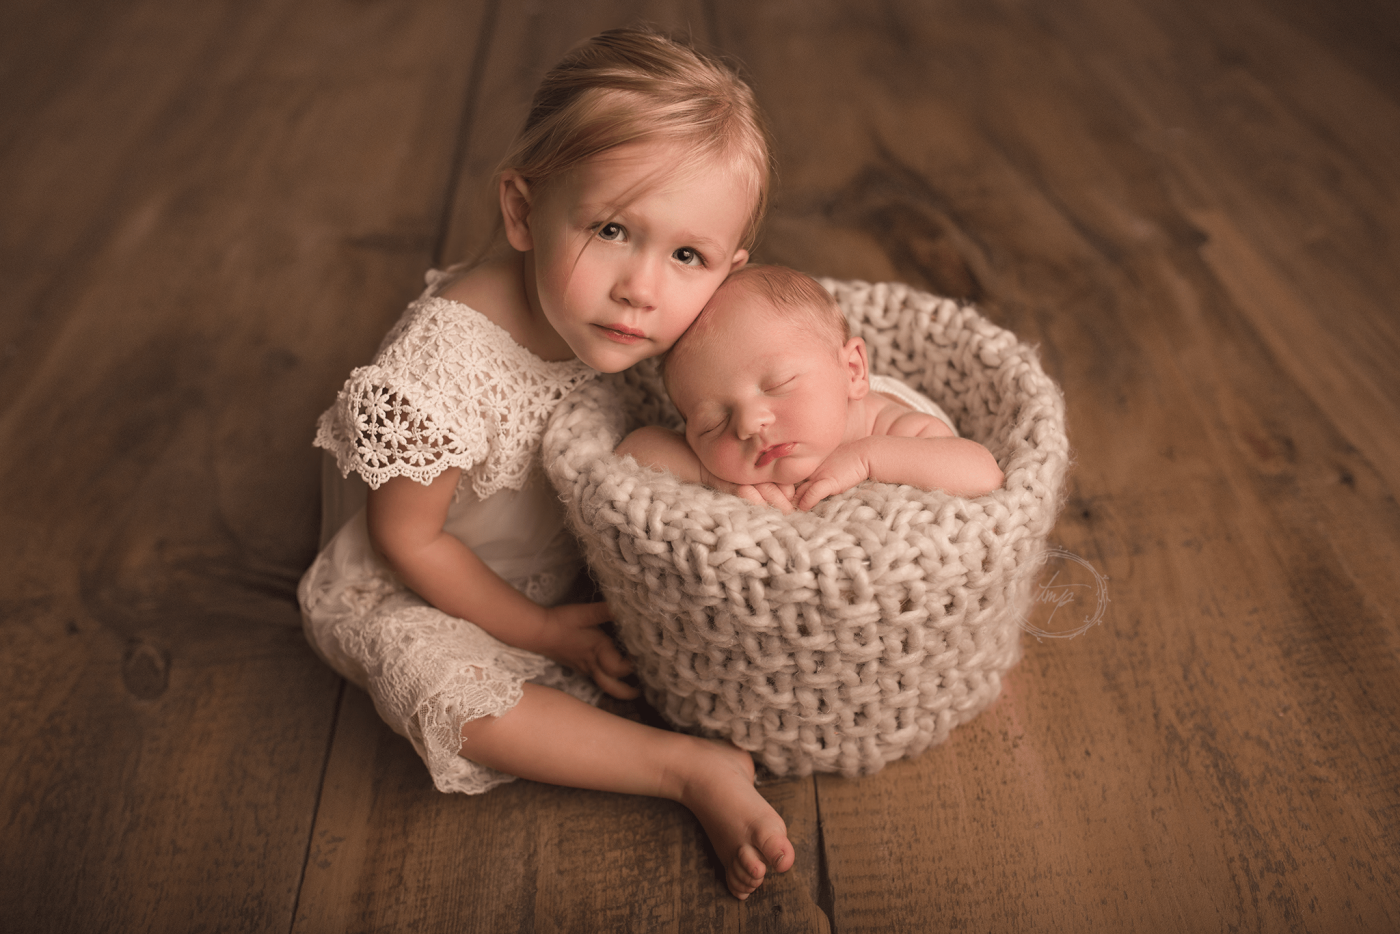 Big sister had just recently turned 2 years old before her baby brother came into the world. I couldn't believe how incredibly sweet and careful she was with him. She will be a great protector and friend to the little man. 